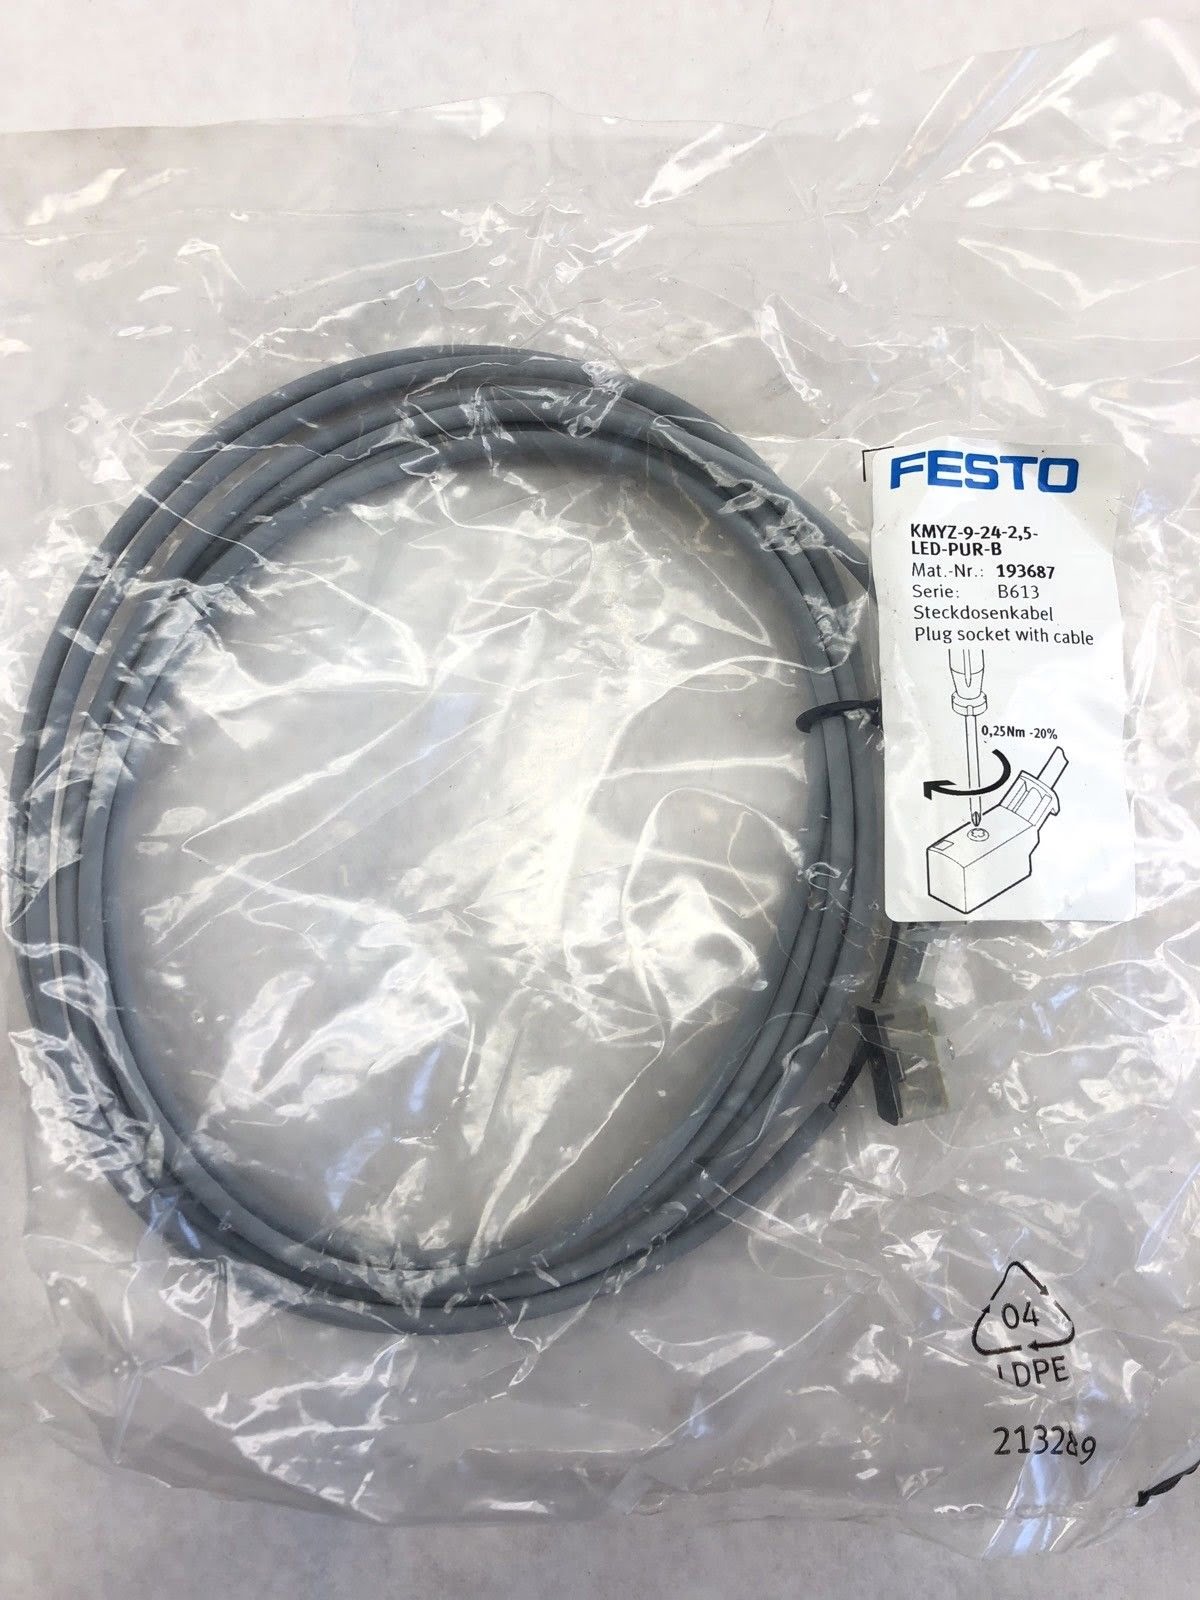 direction Round and round Word FESTO KMYZ-9-24-2,5-LED-PUR-B SOCKET CONNECTOR CABLE (J37)